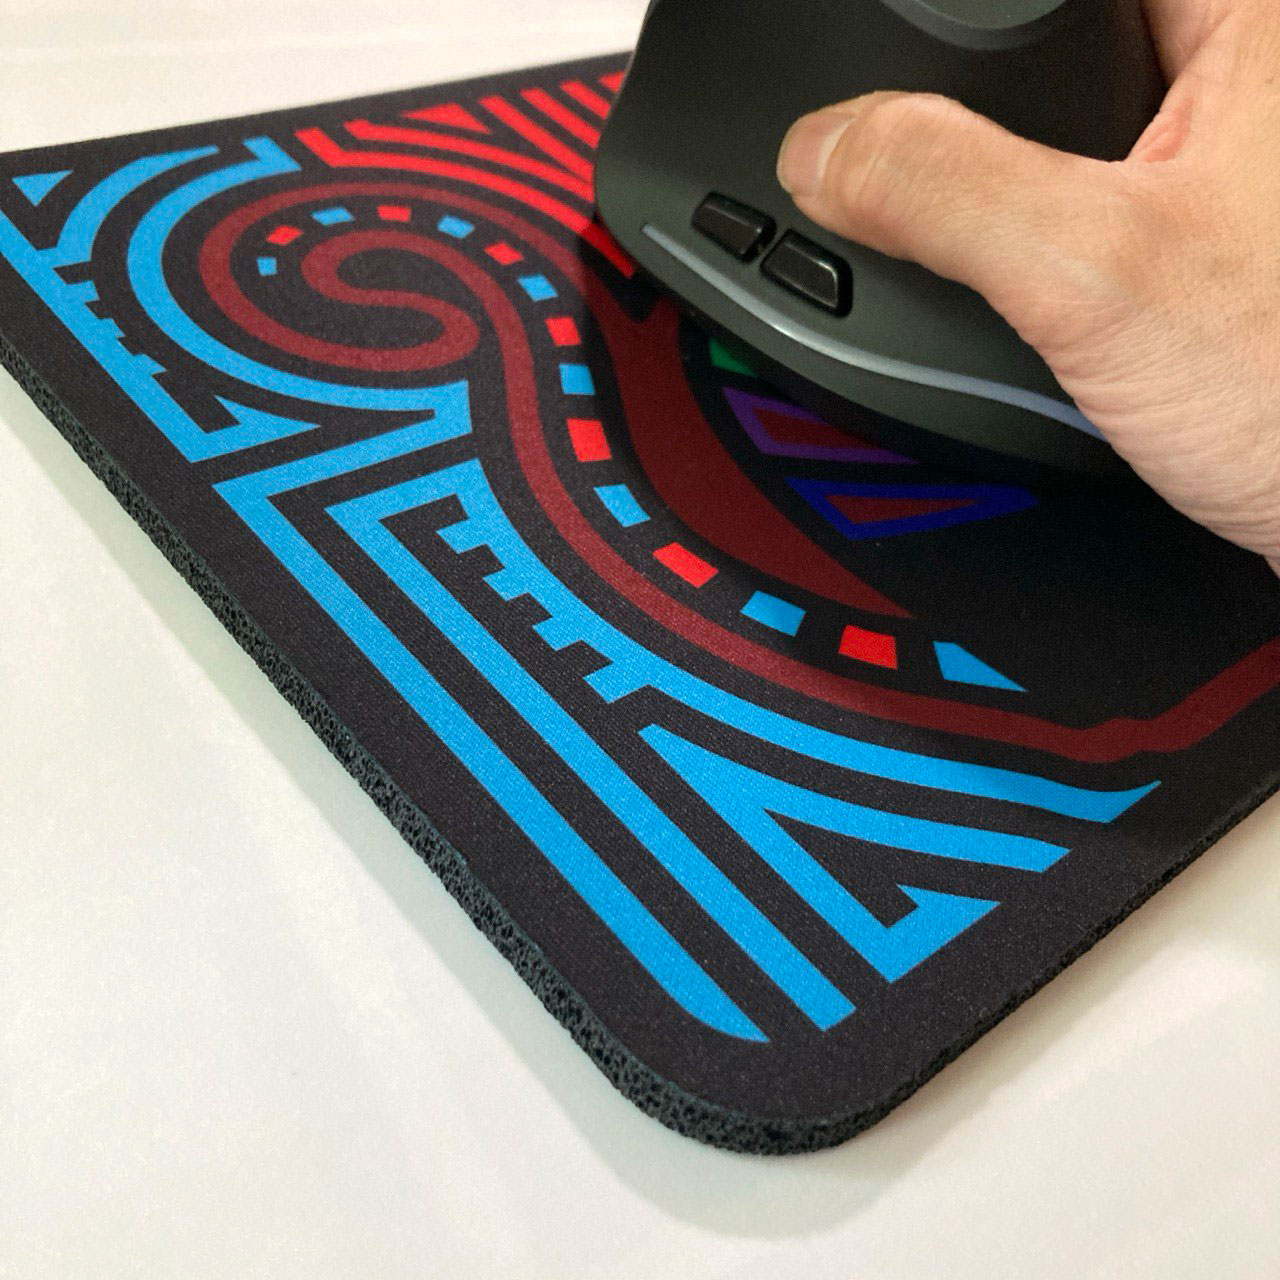 Love how the colors pop in this mousepad! In case you were curious, I'm using an ergonomic vert